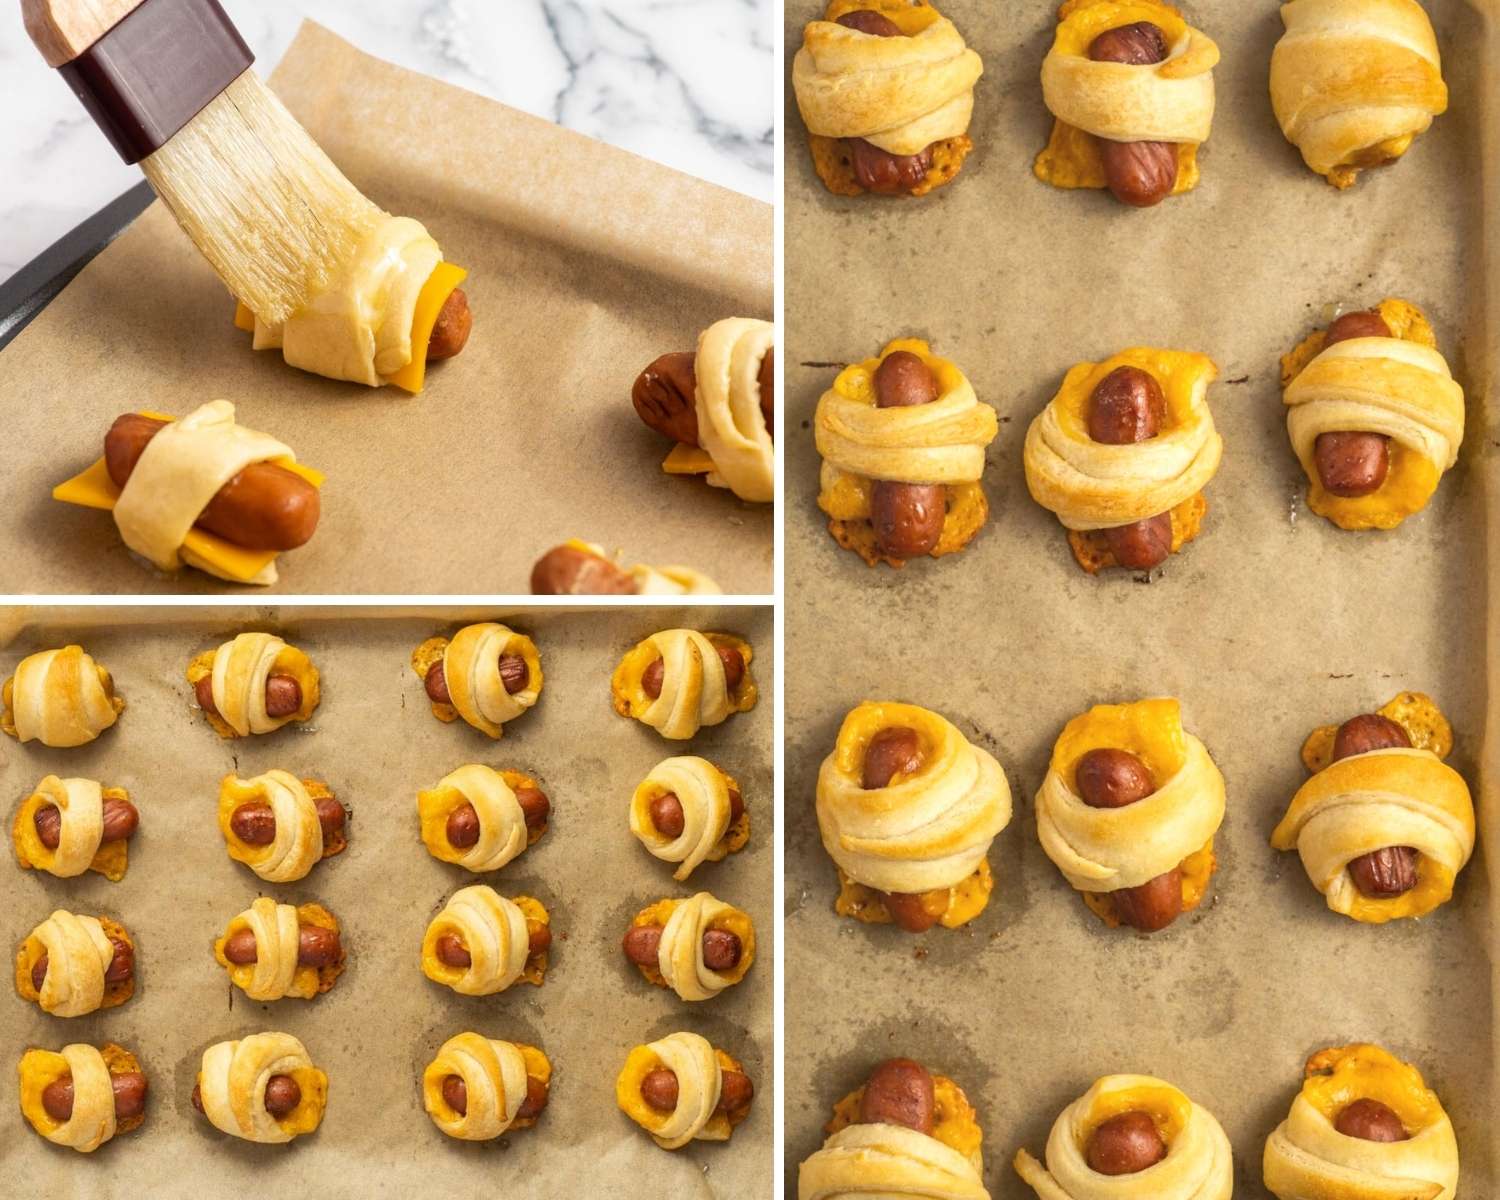 Brushing the pigs in blanket with butter and baking them